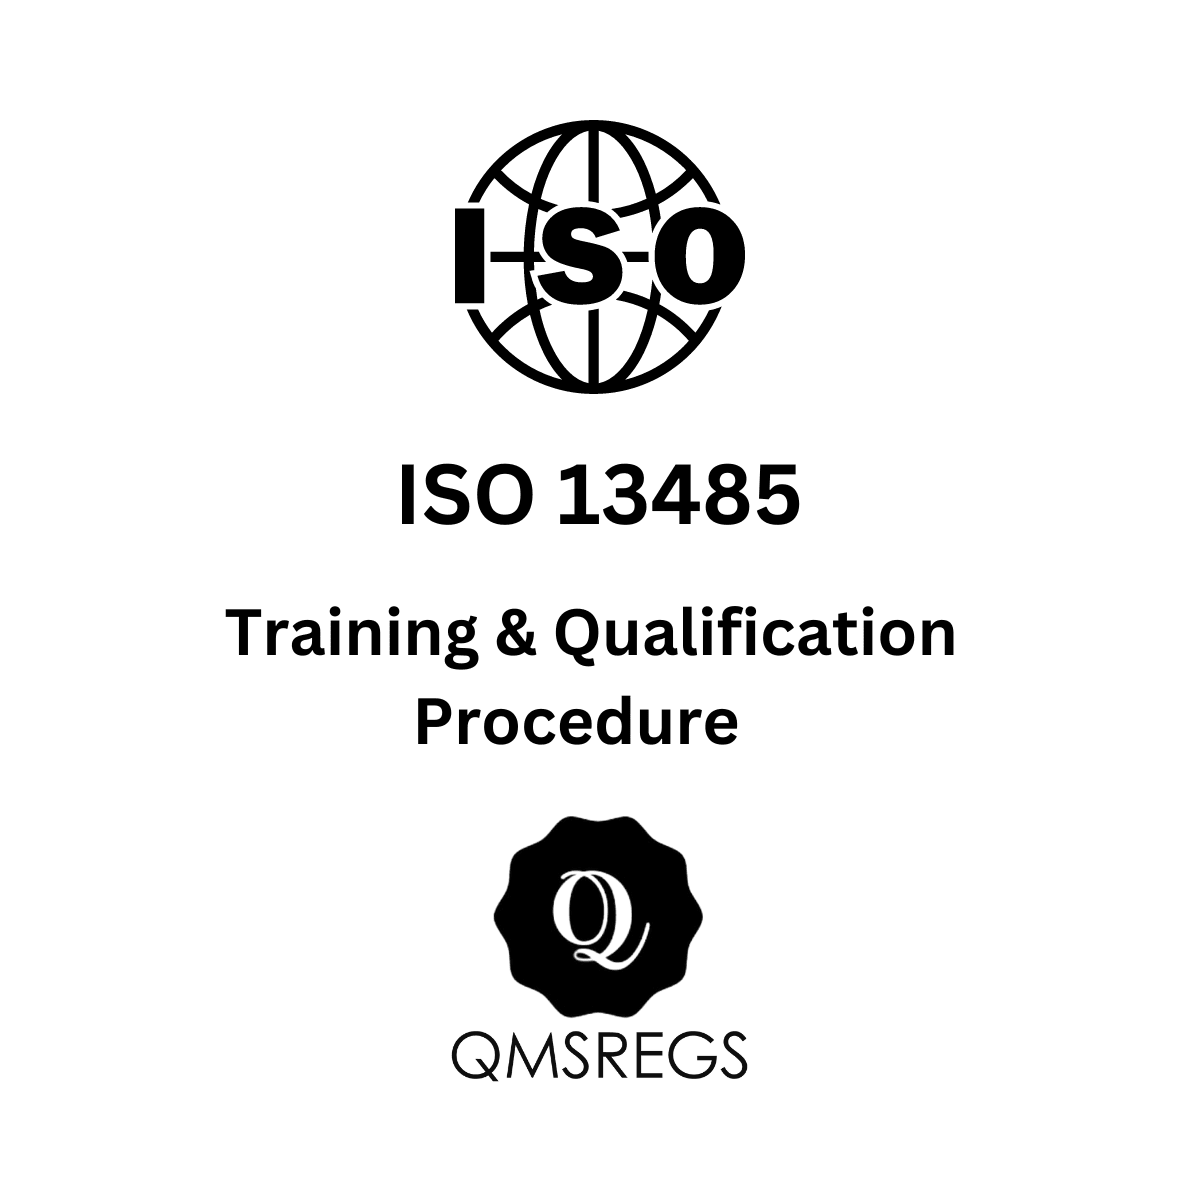 ISO 13485 Training and Qualification Procedure Template